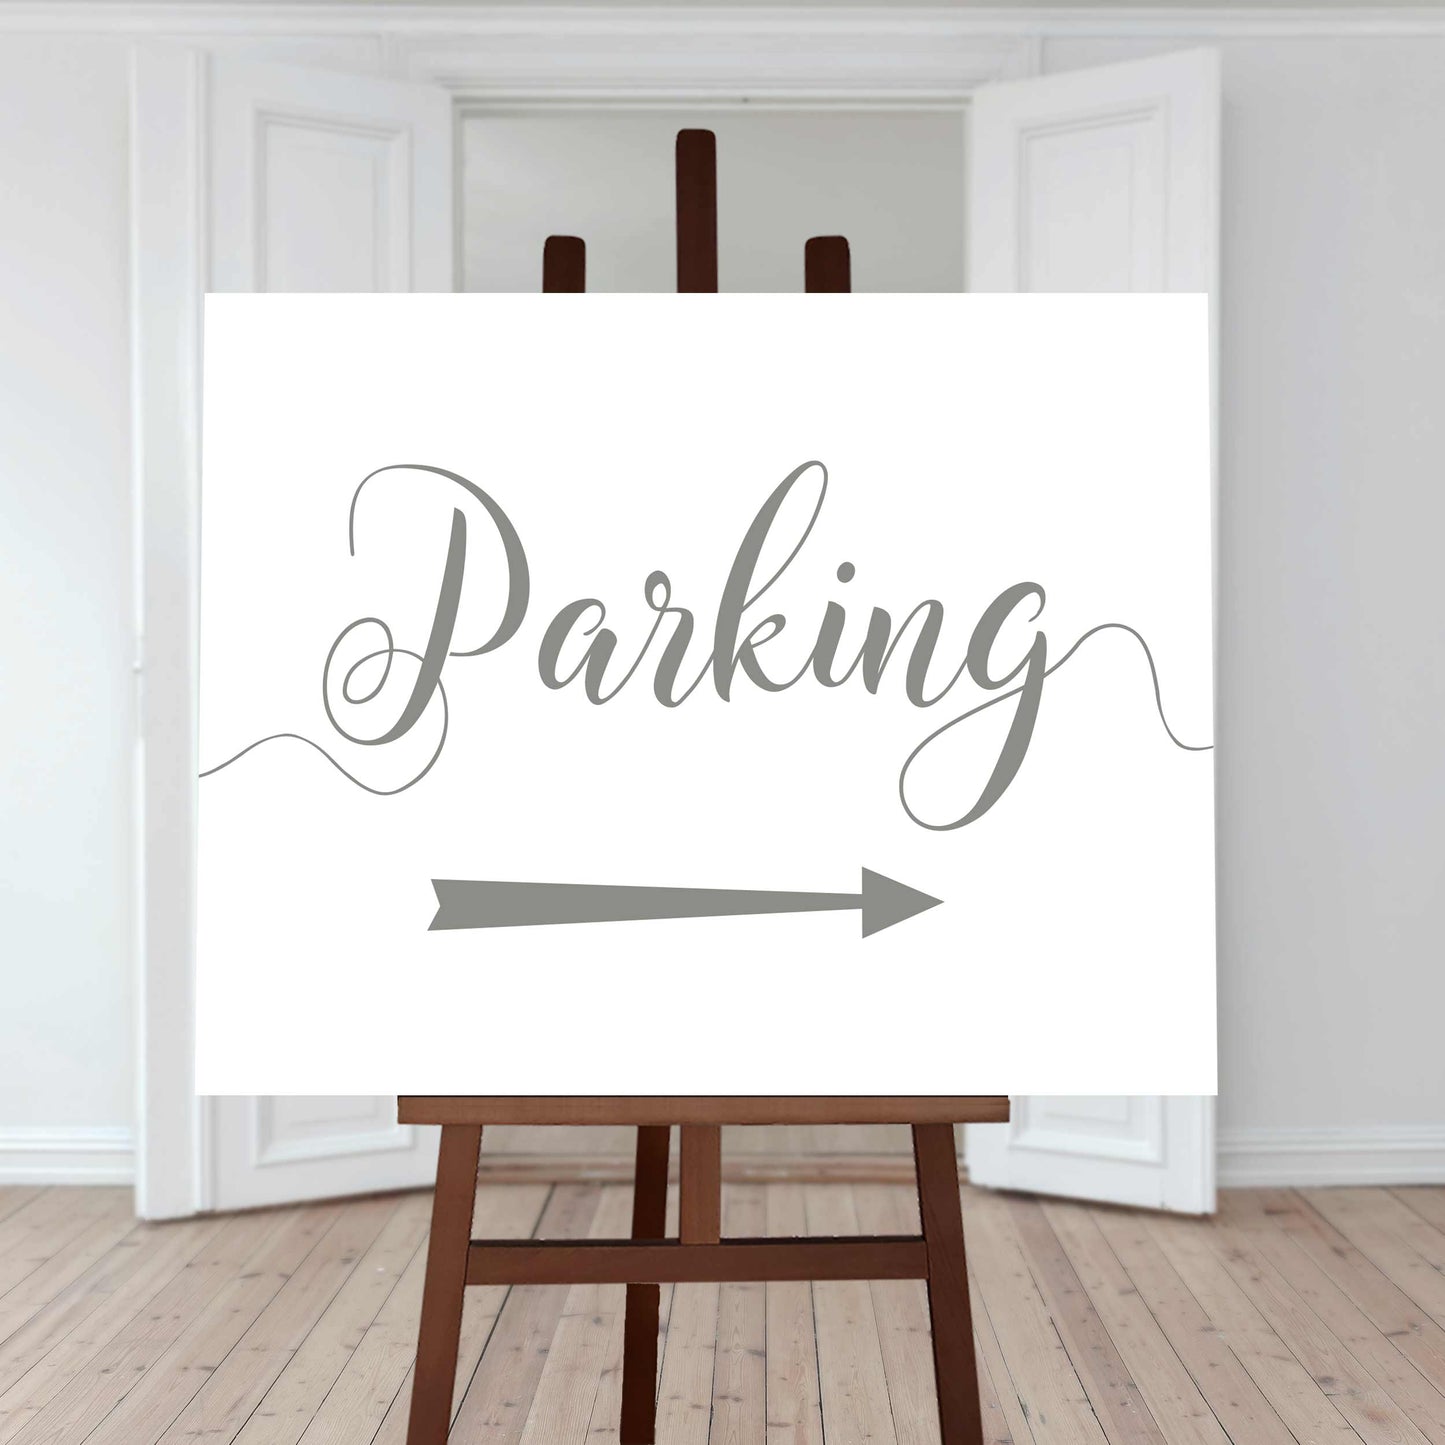 laurel green wedding car park directions sign with an arrow pointing right